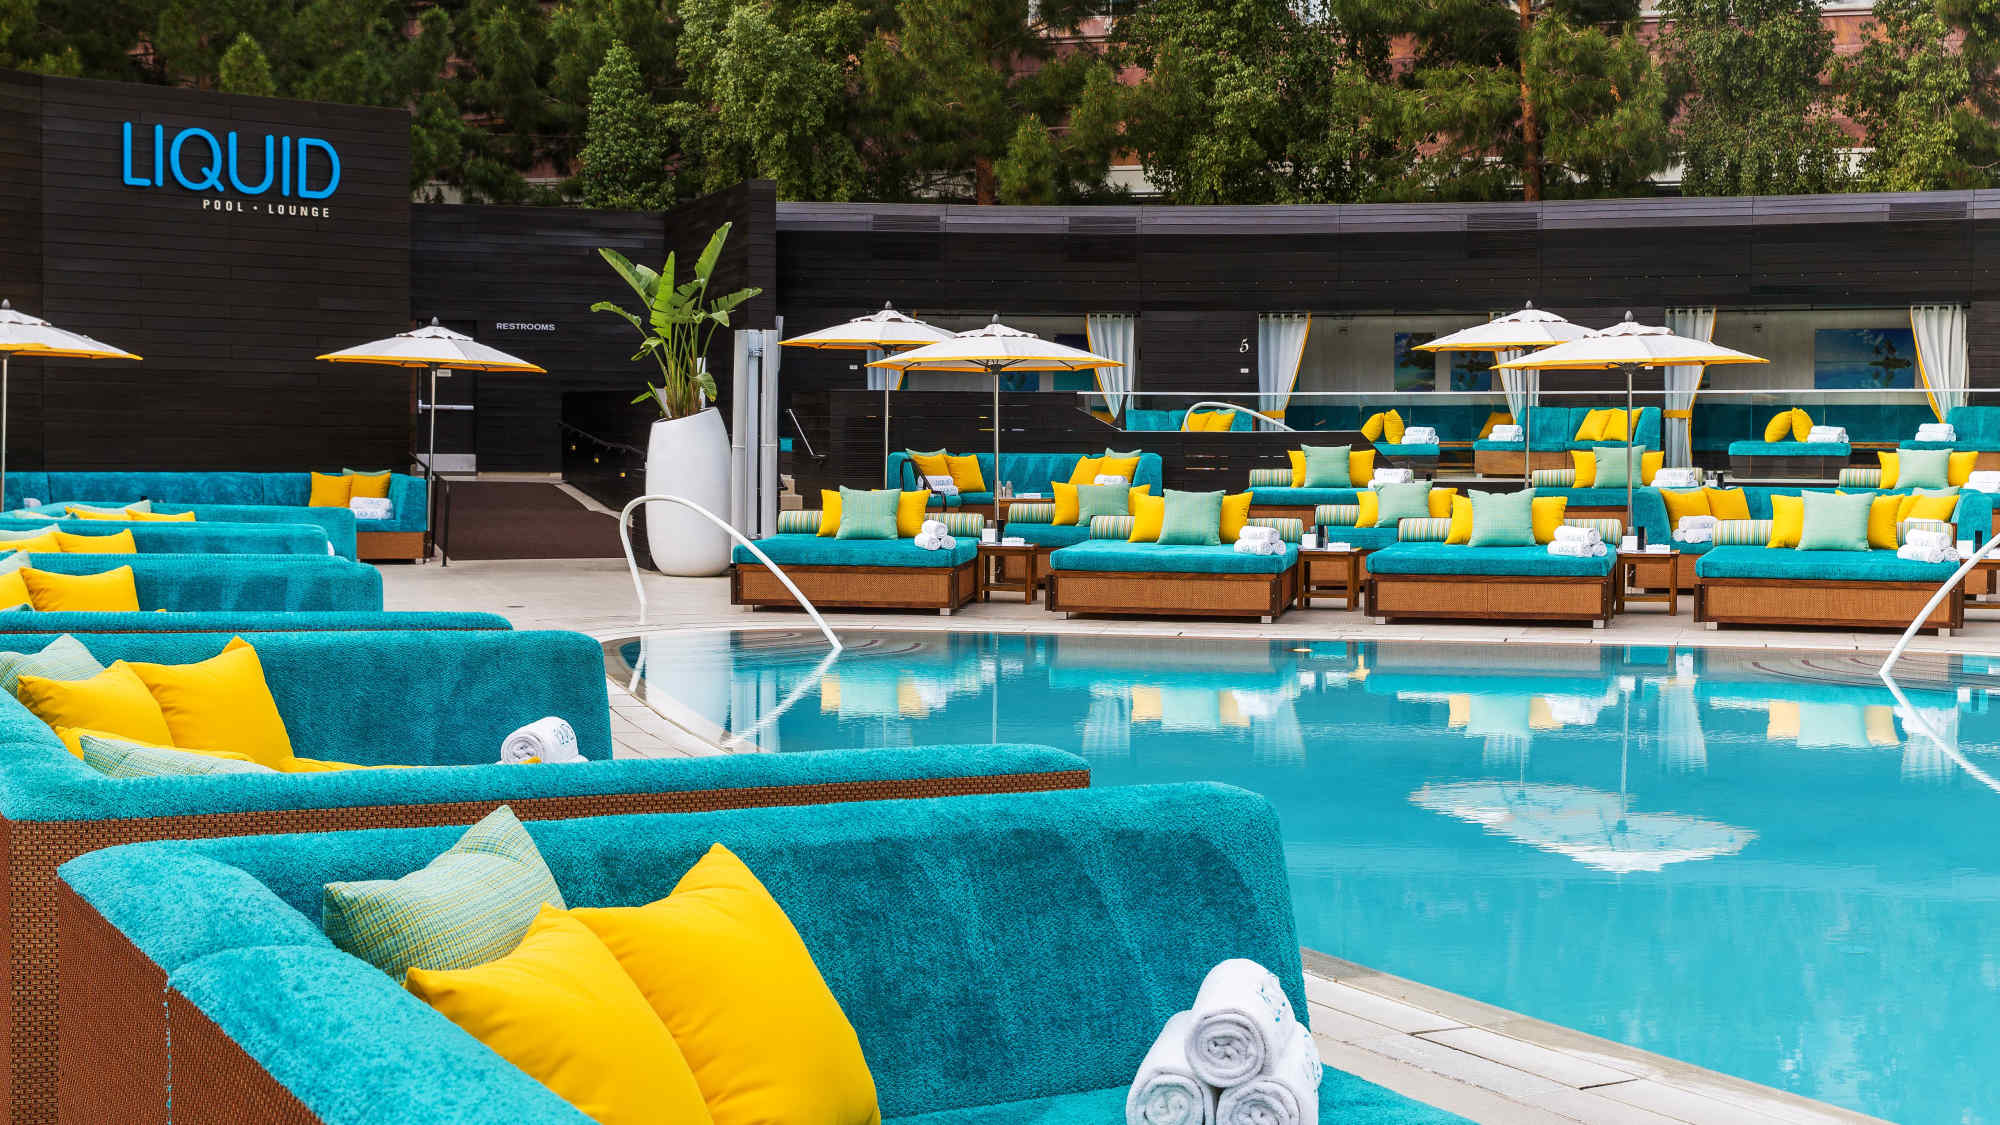 las vegas aria liquid pool lounge daybeds and pool couches